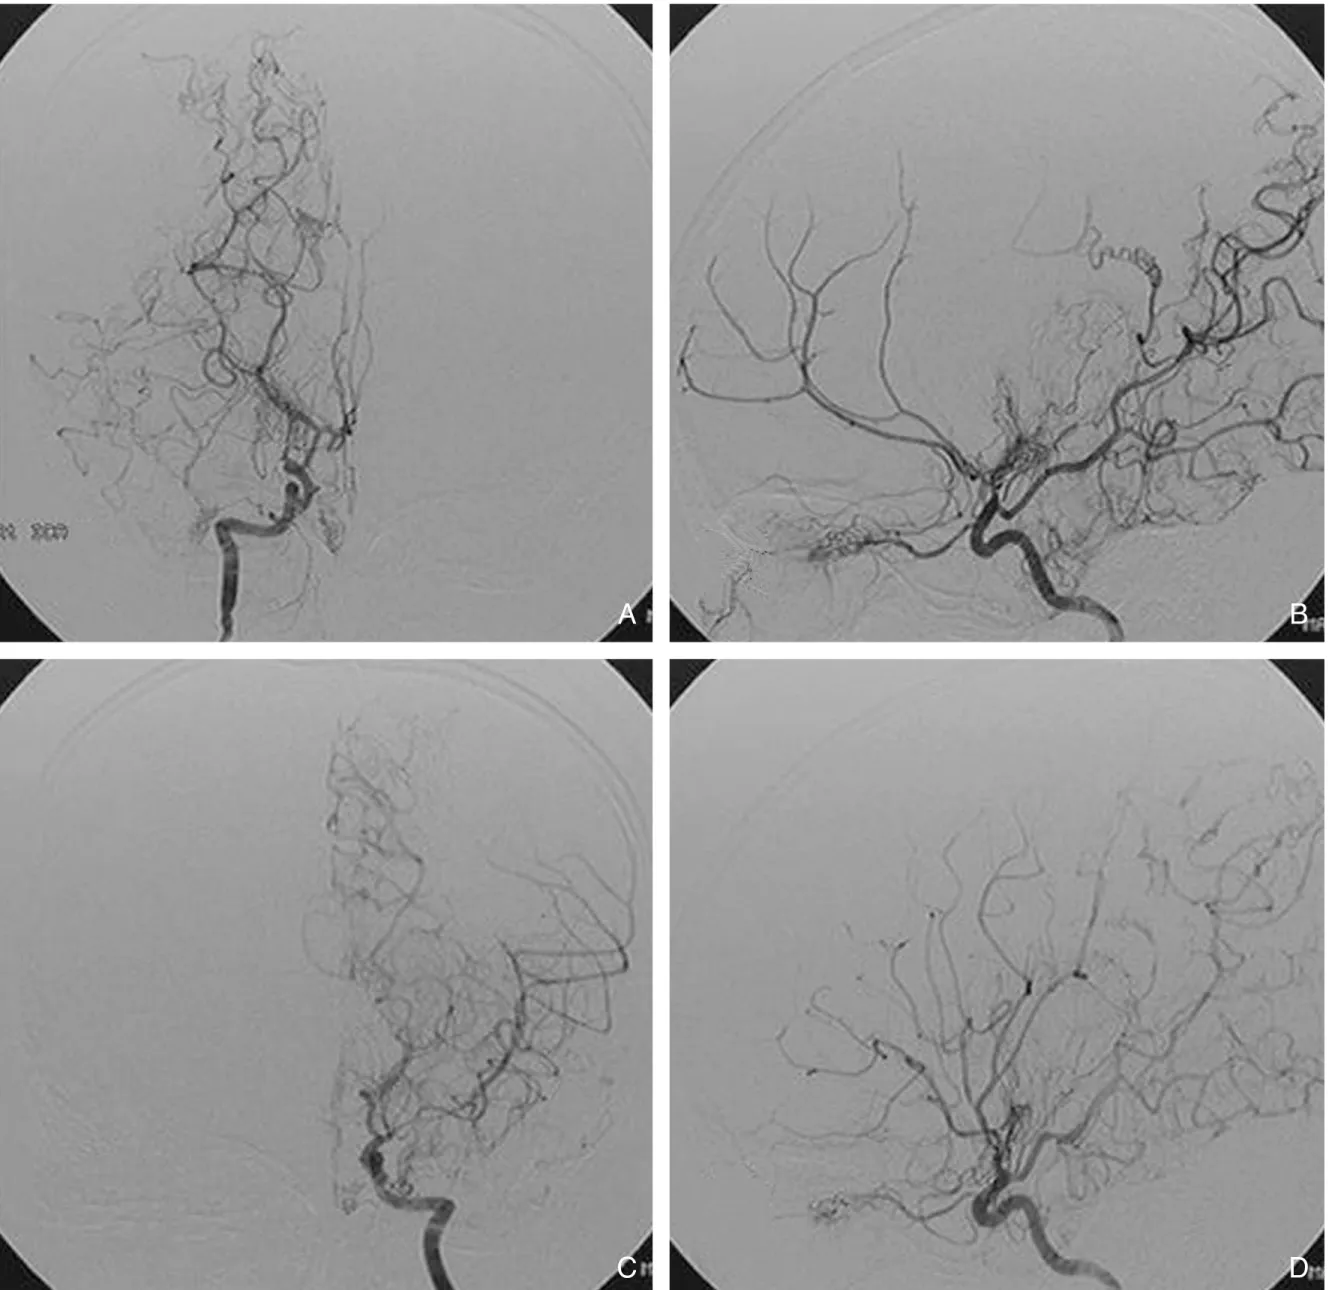 Figure 4. A right carotid angiography (A: AP view, B: lateral view) shows stenotic change in the terminal portion of the internal carotid artery, total occlusion in the middle cerebral artery and stenotic change in the proximal anterior cerebral artery